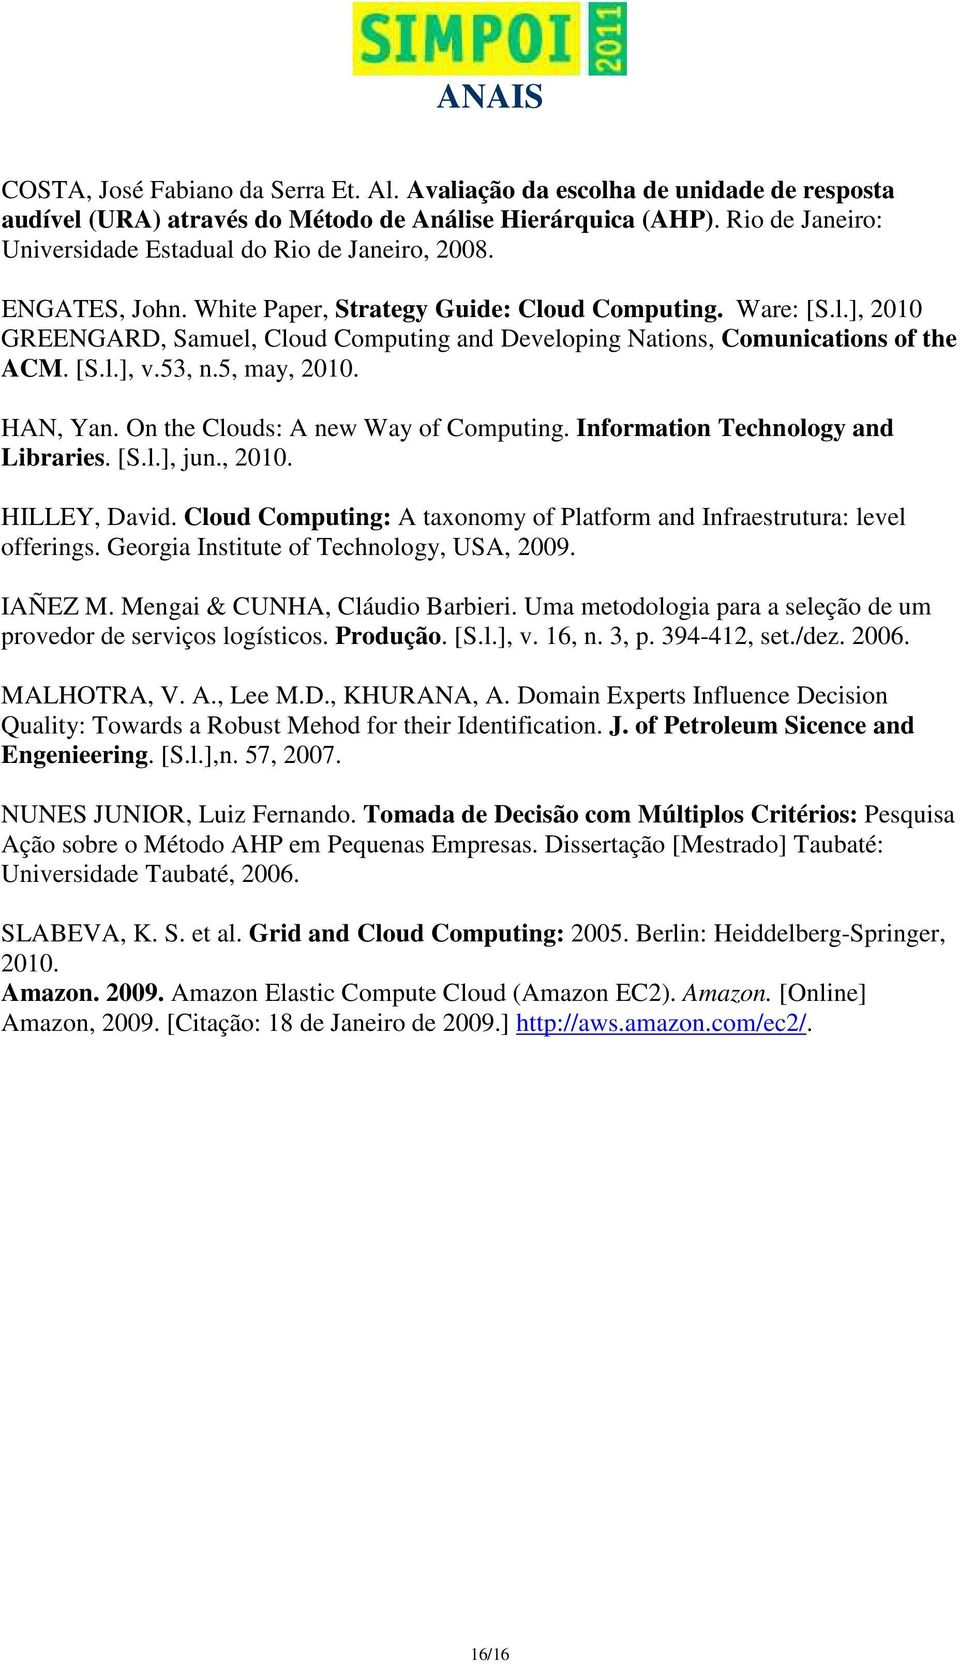 [S.l.], v.53, n.5, may, 2010. HAN, Yan. On the Clouds: A new Way of Computing. Information Technology and Libraries. [S.l.], jun., 2010. HILLEY, David.